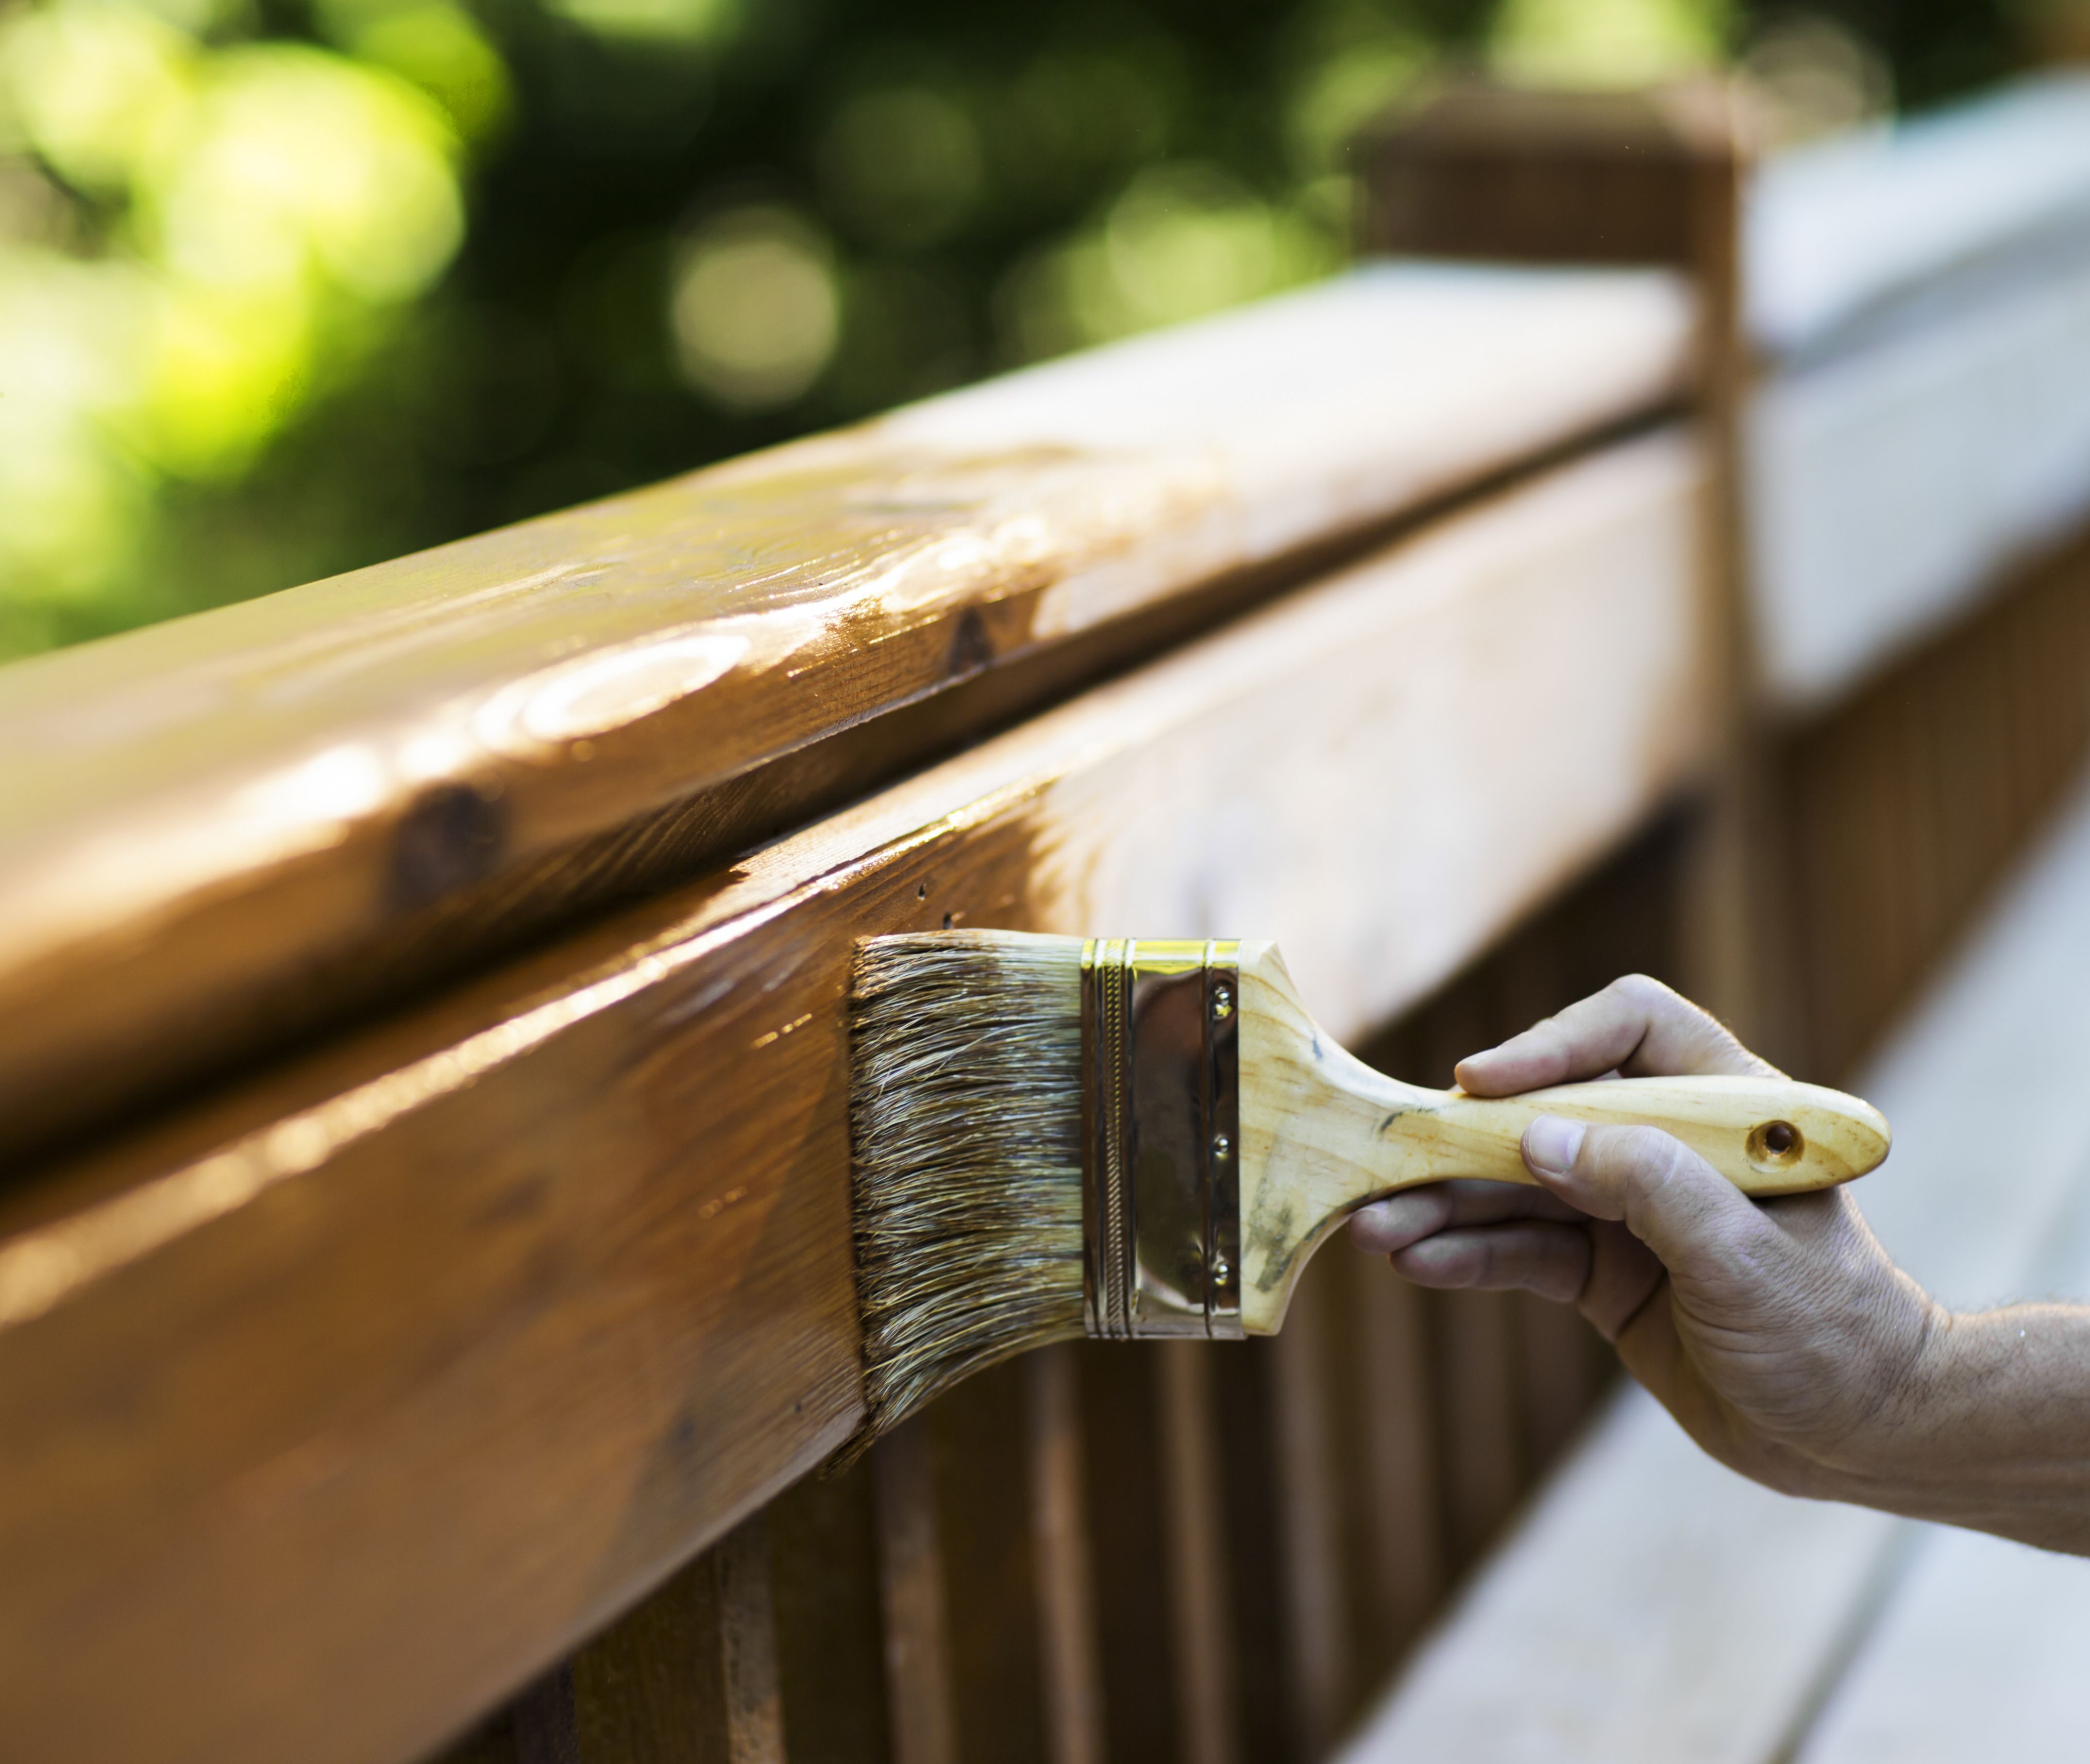 How to Stain Pressure-Treated Wood - How to Stain a Deck